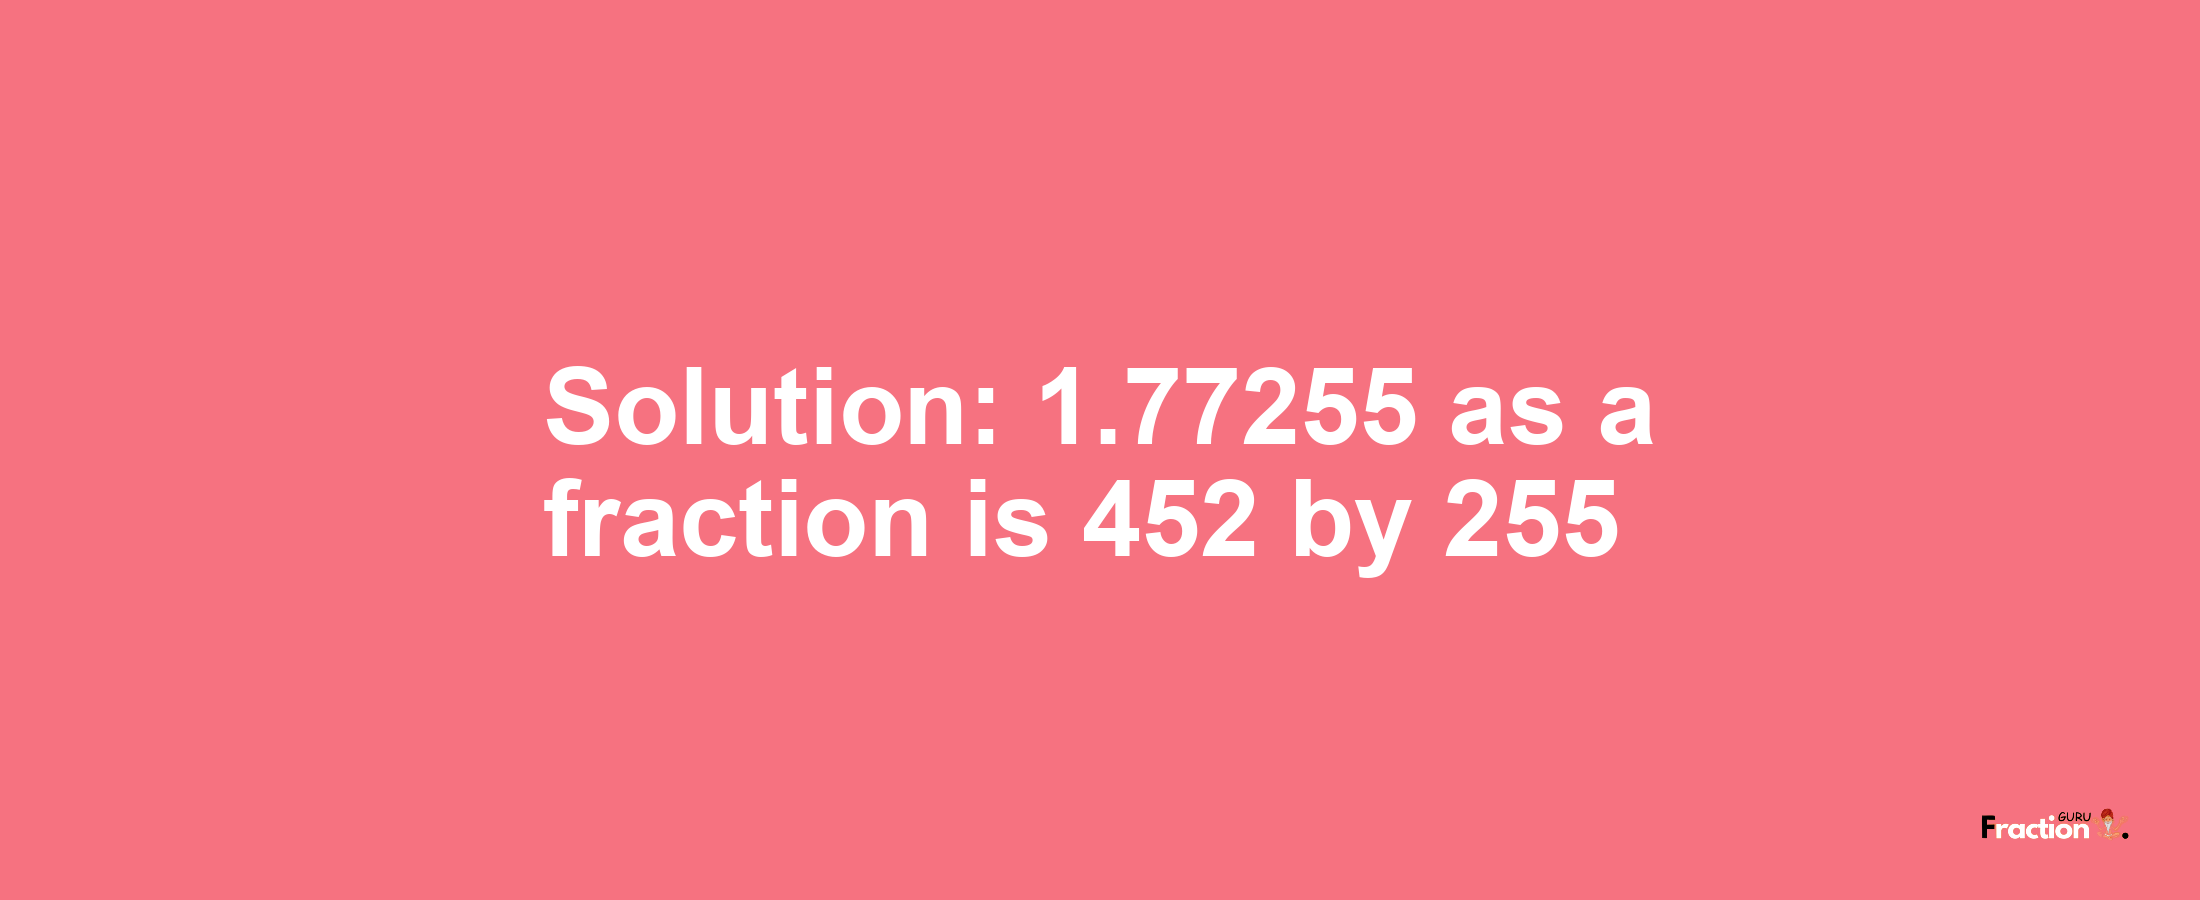 Solution:1.77255 as a fraction is 452/255